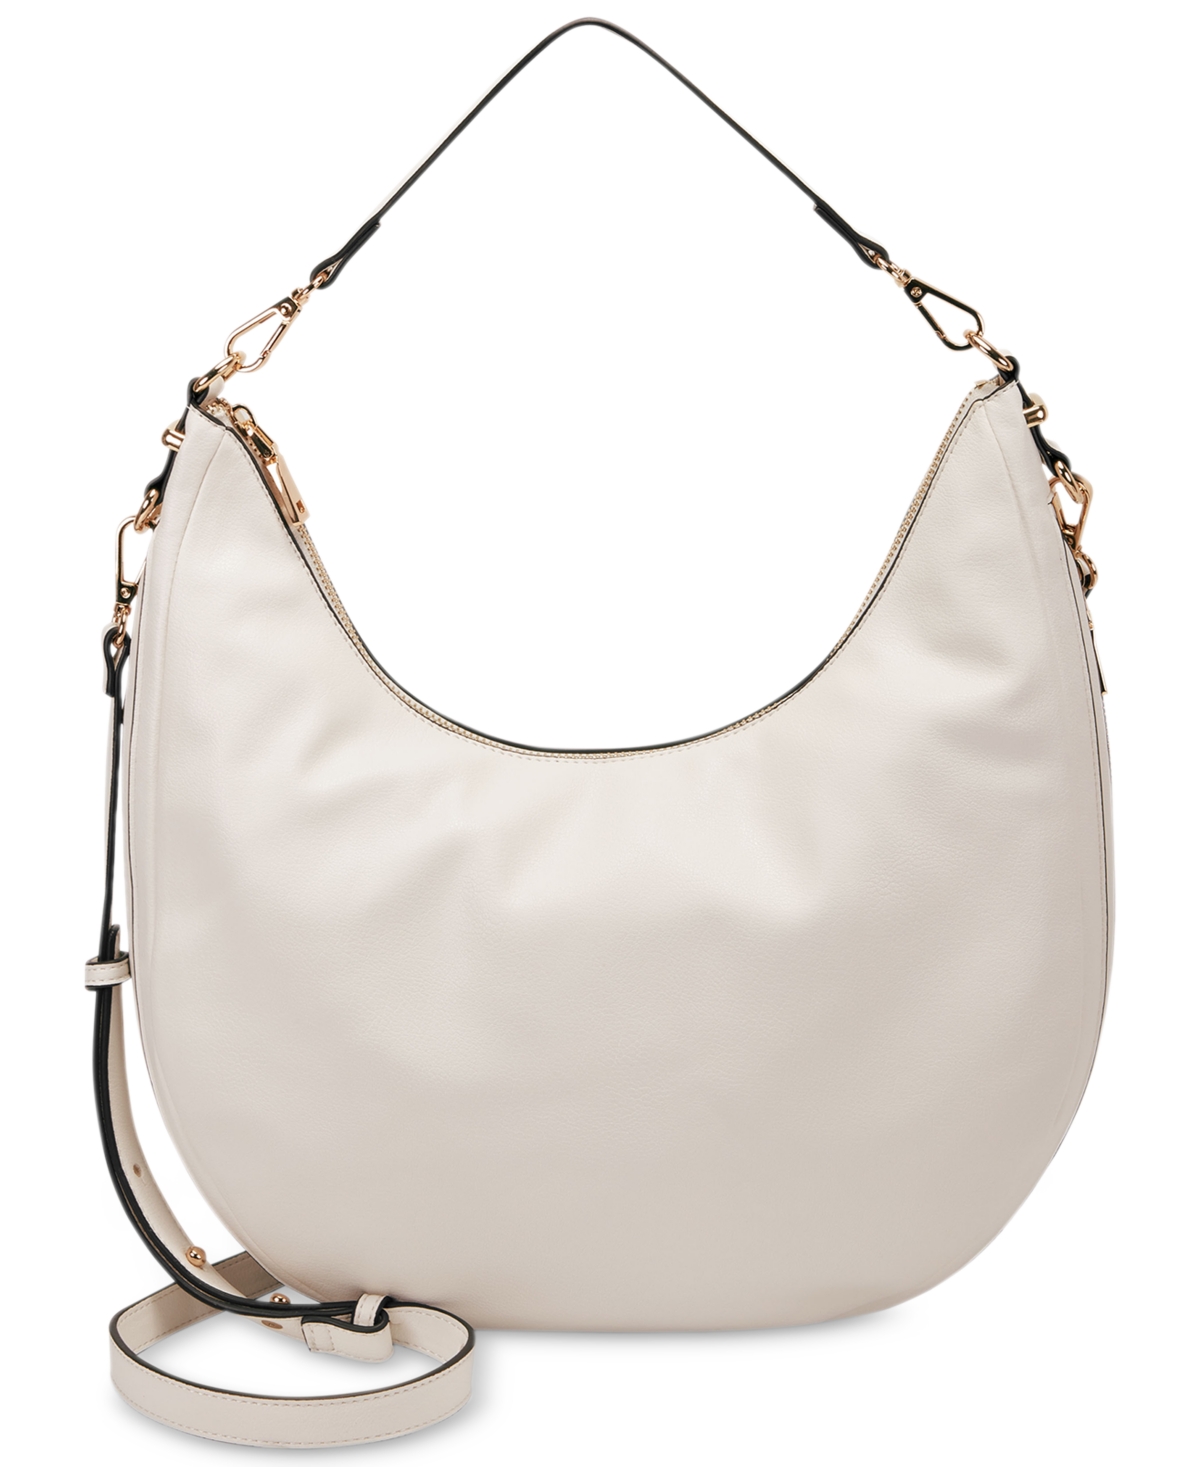 CLN - NEW IN: The Salinah Hobo Bag Chic & compact that works with